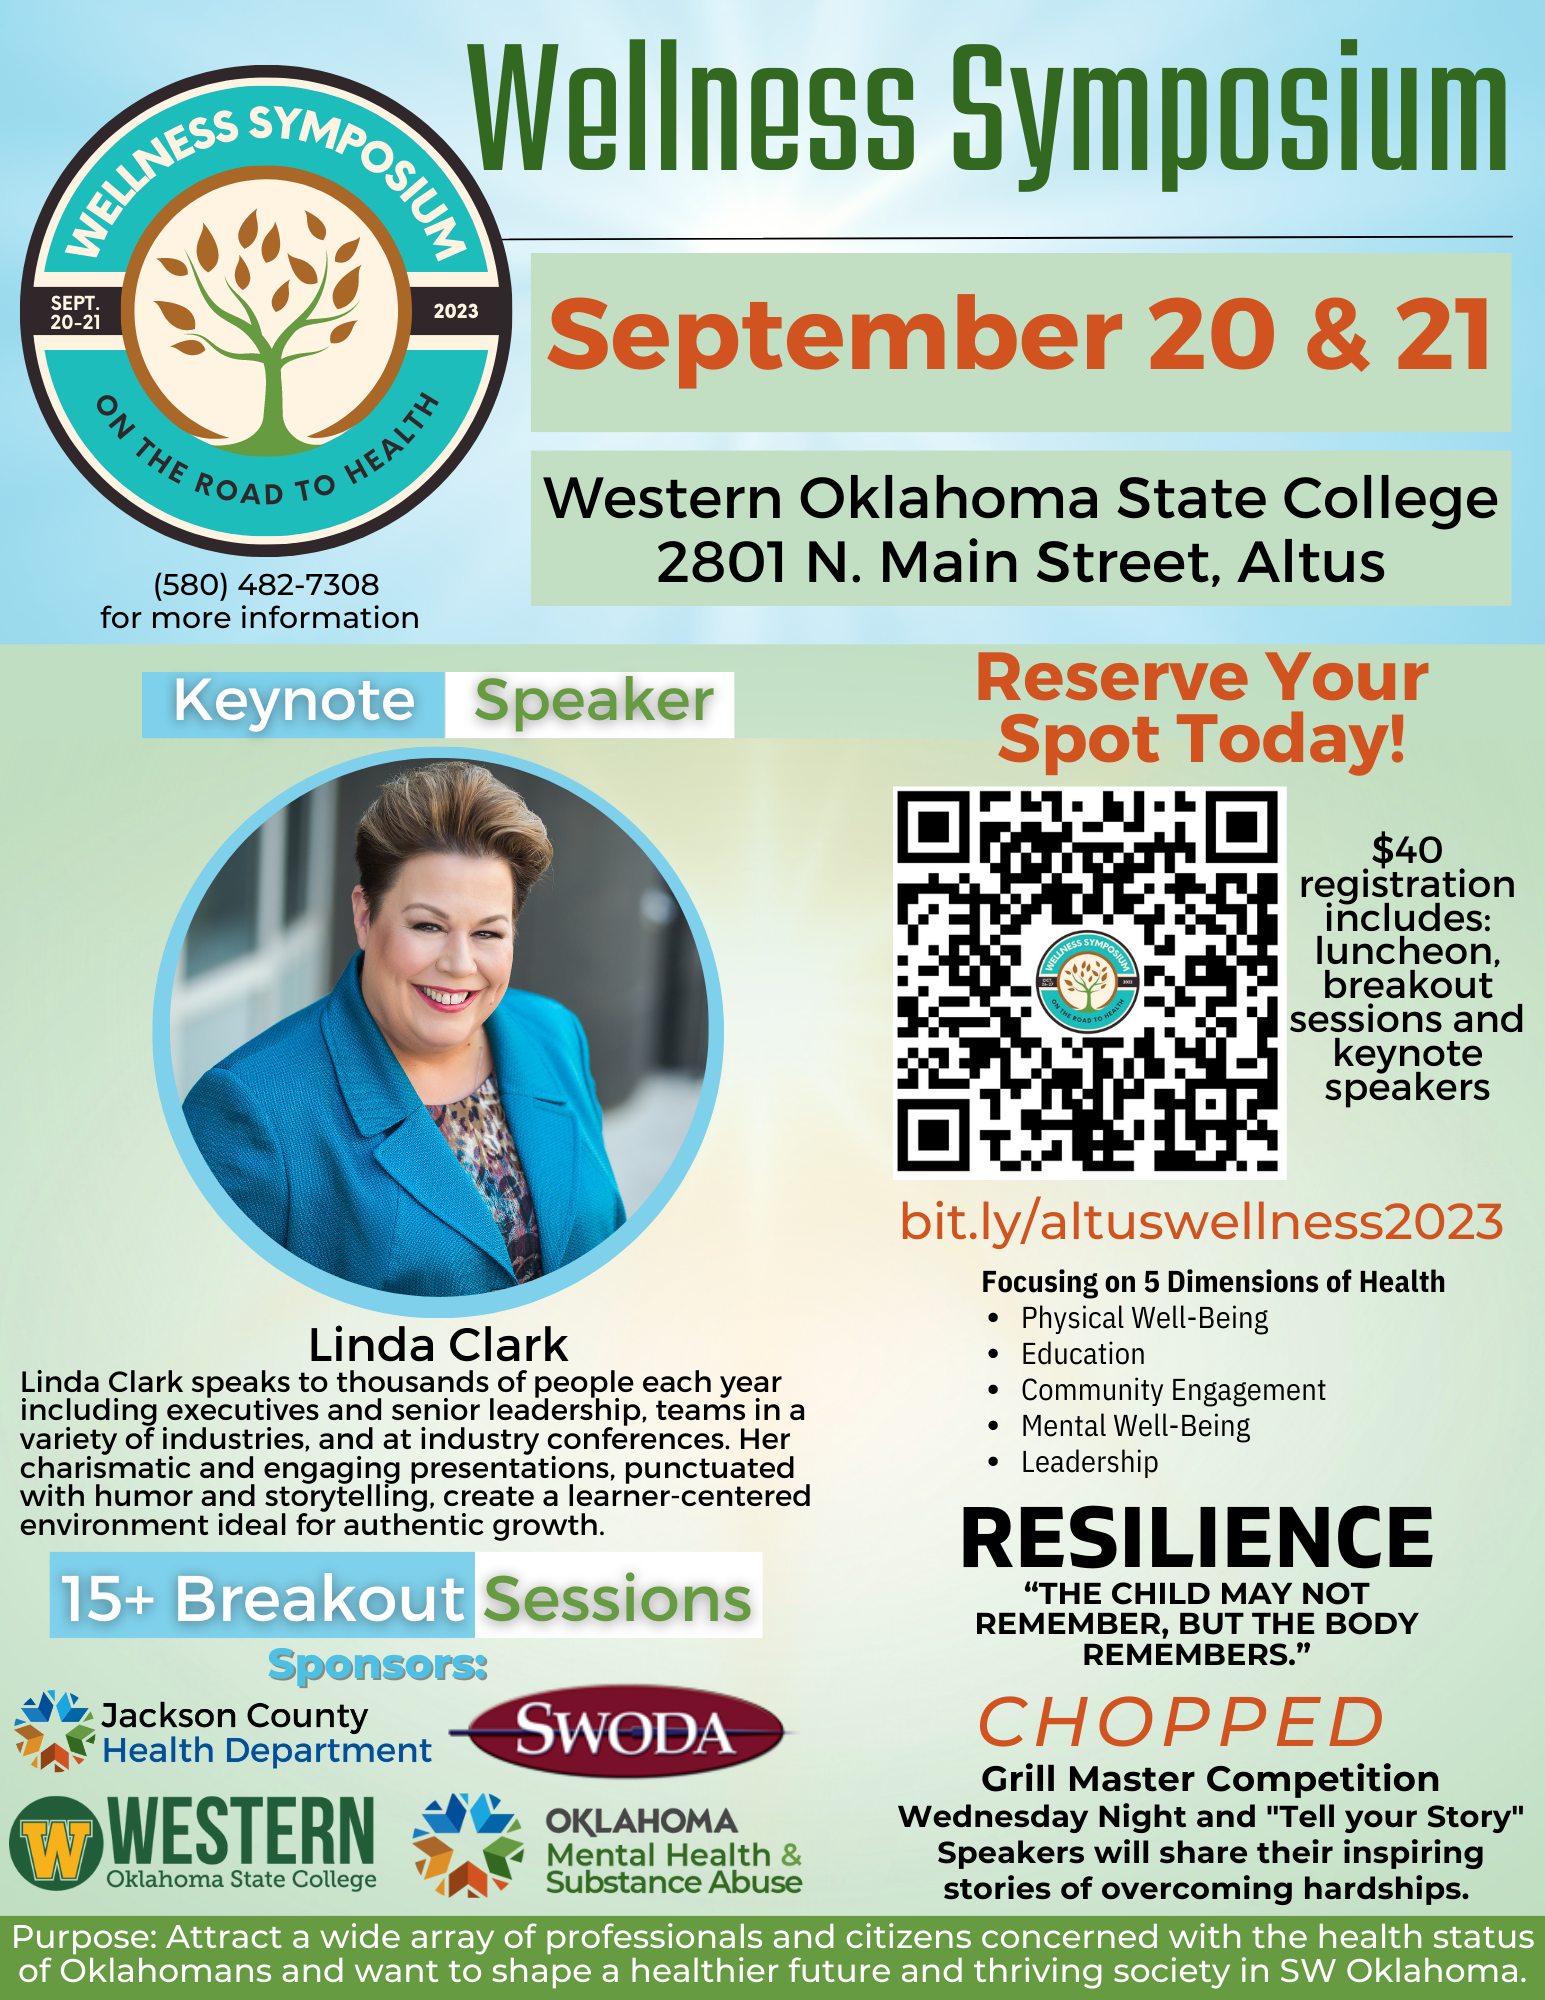 An advertisement features details of the Altus Wellness Symposium scheduled for September 20 and 21, 2023.